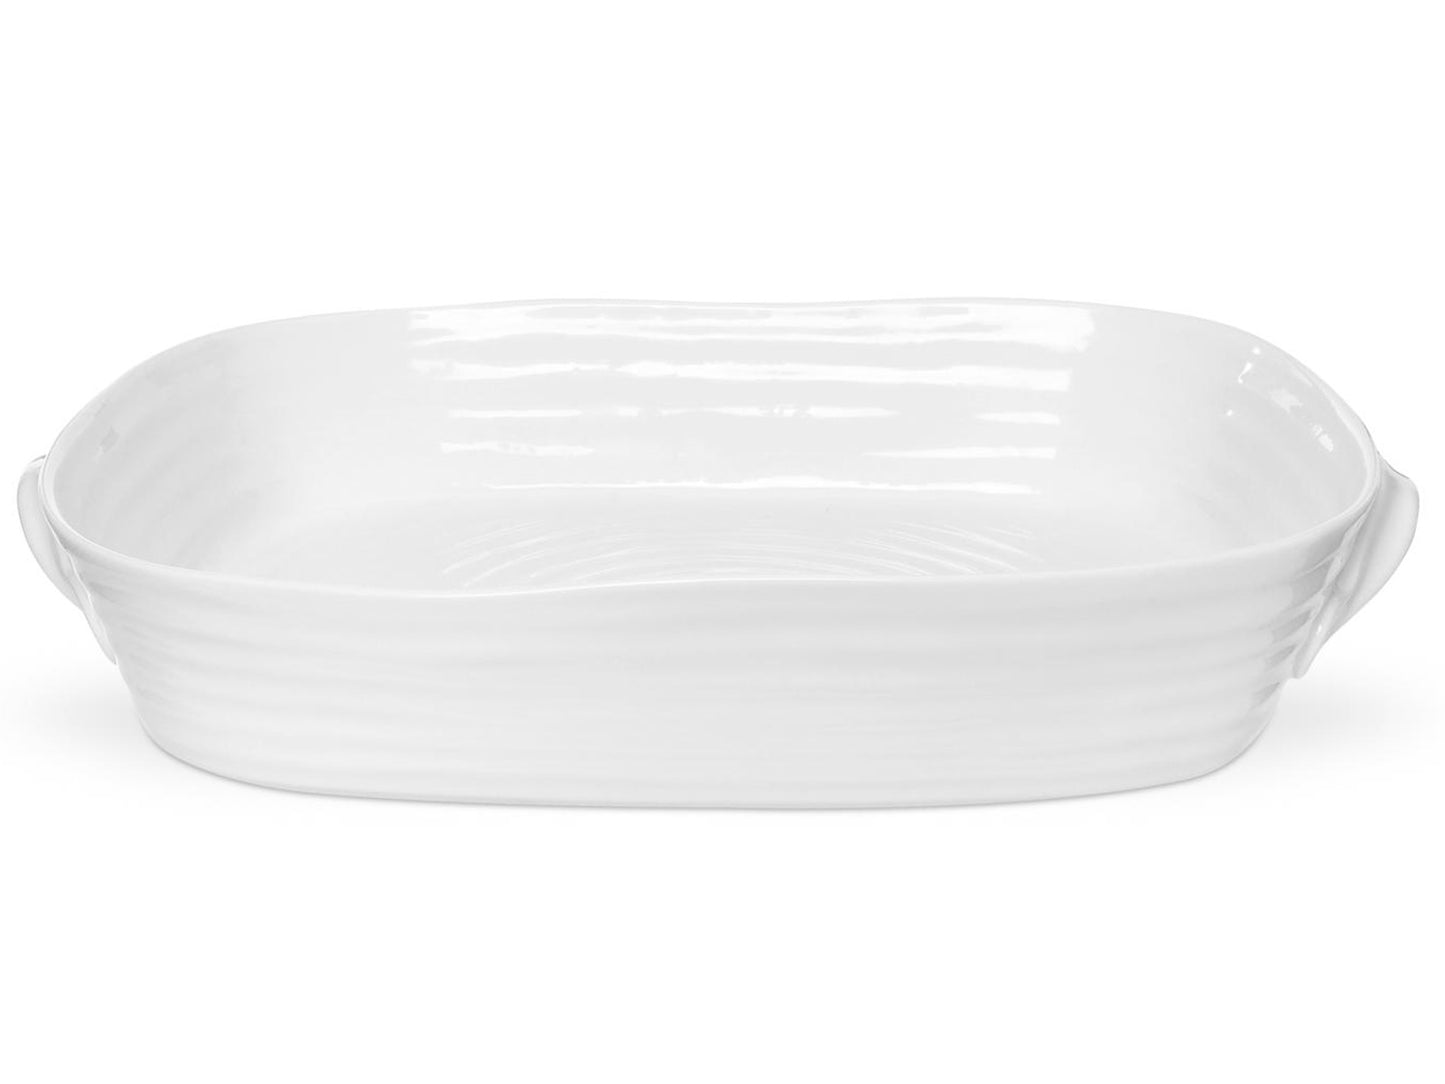 A large rectangular roasting dish with deep sides and handles on the outside